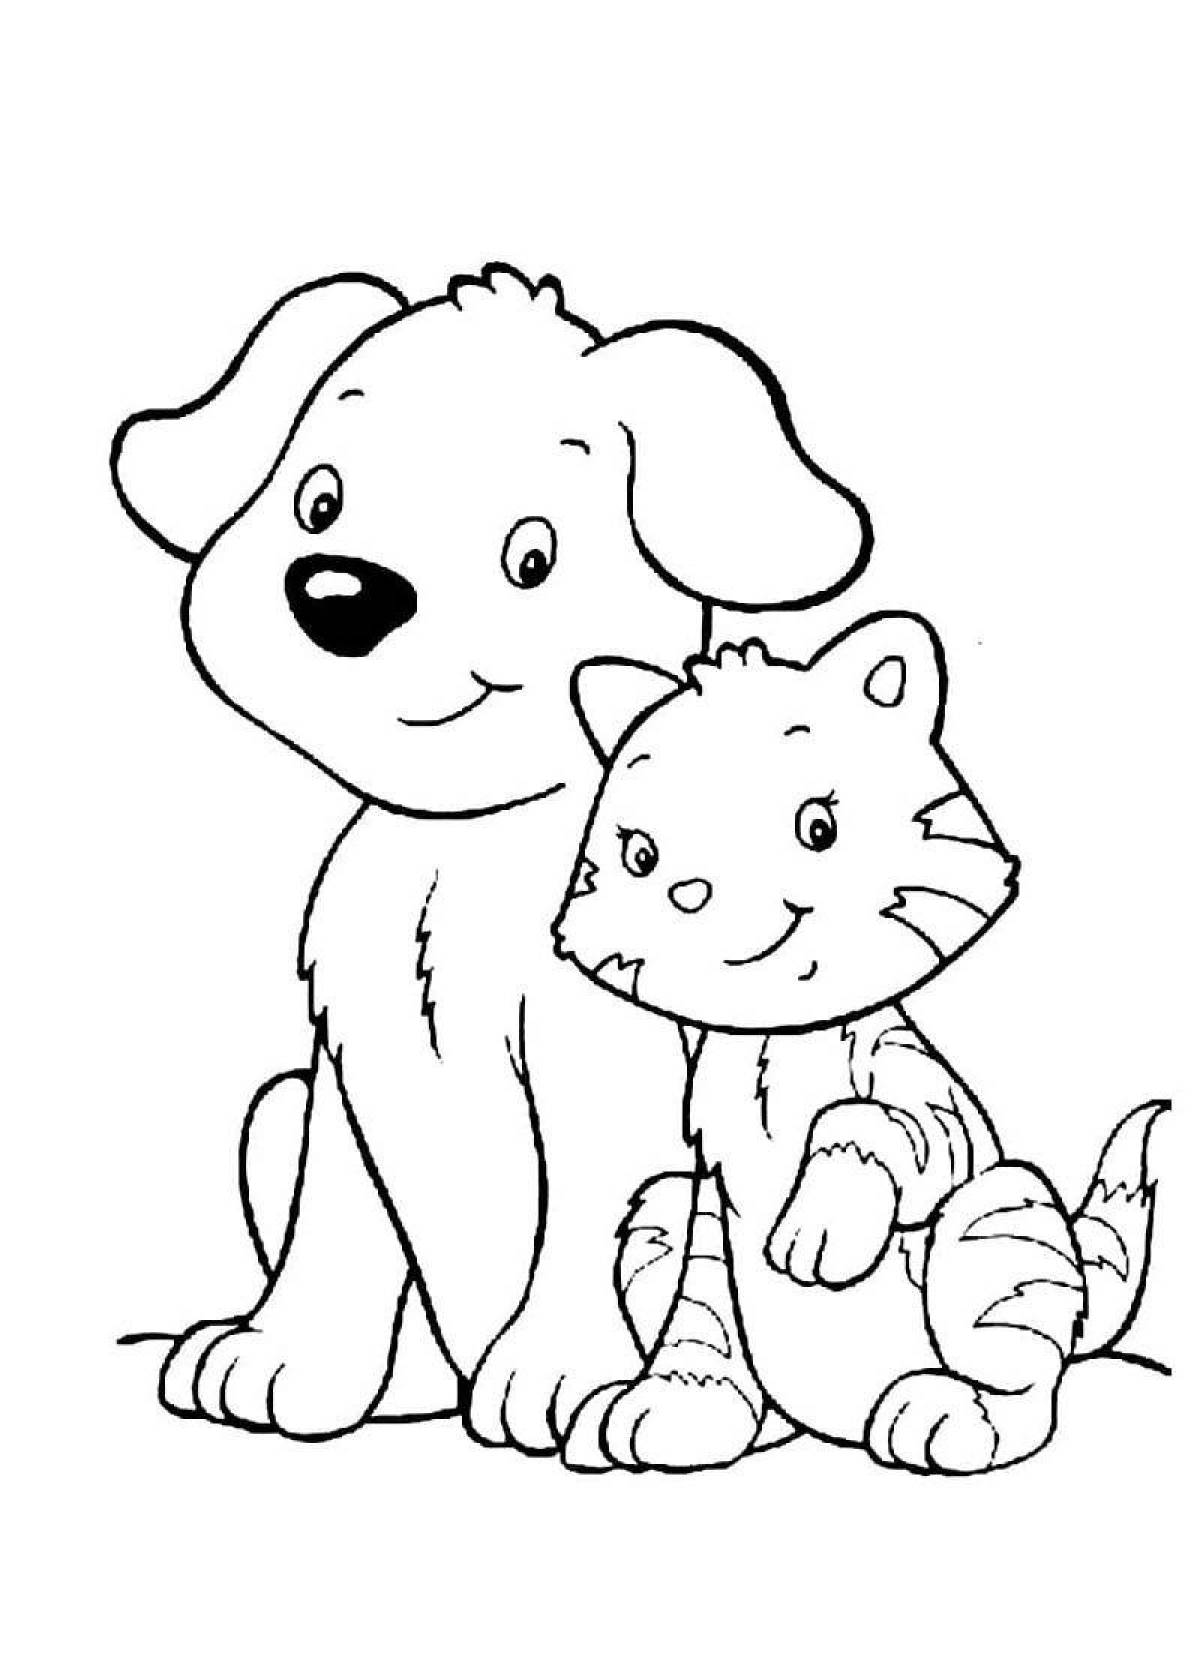 Coloring pages animals cats and dogs